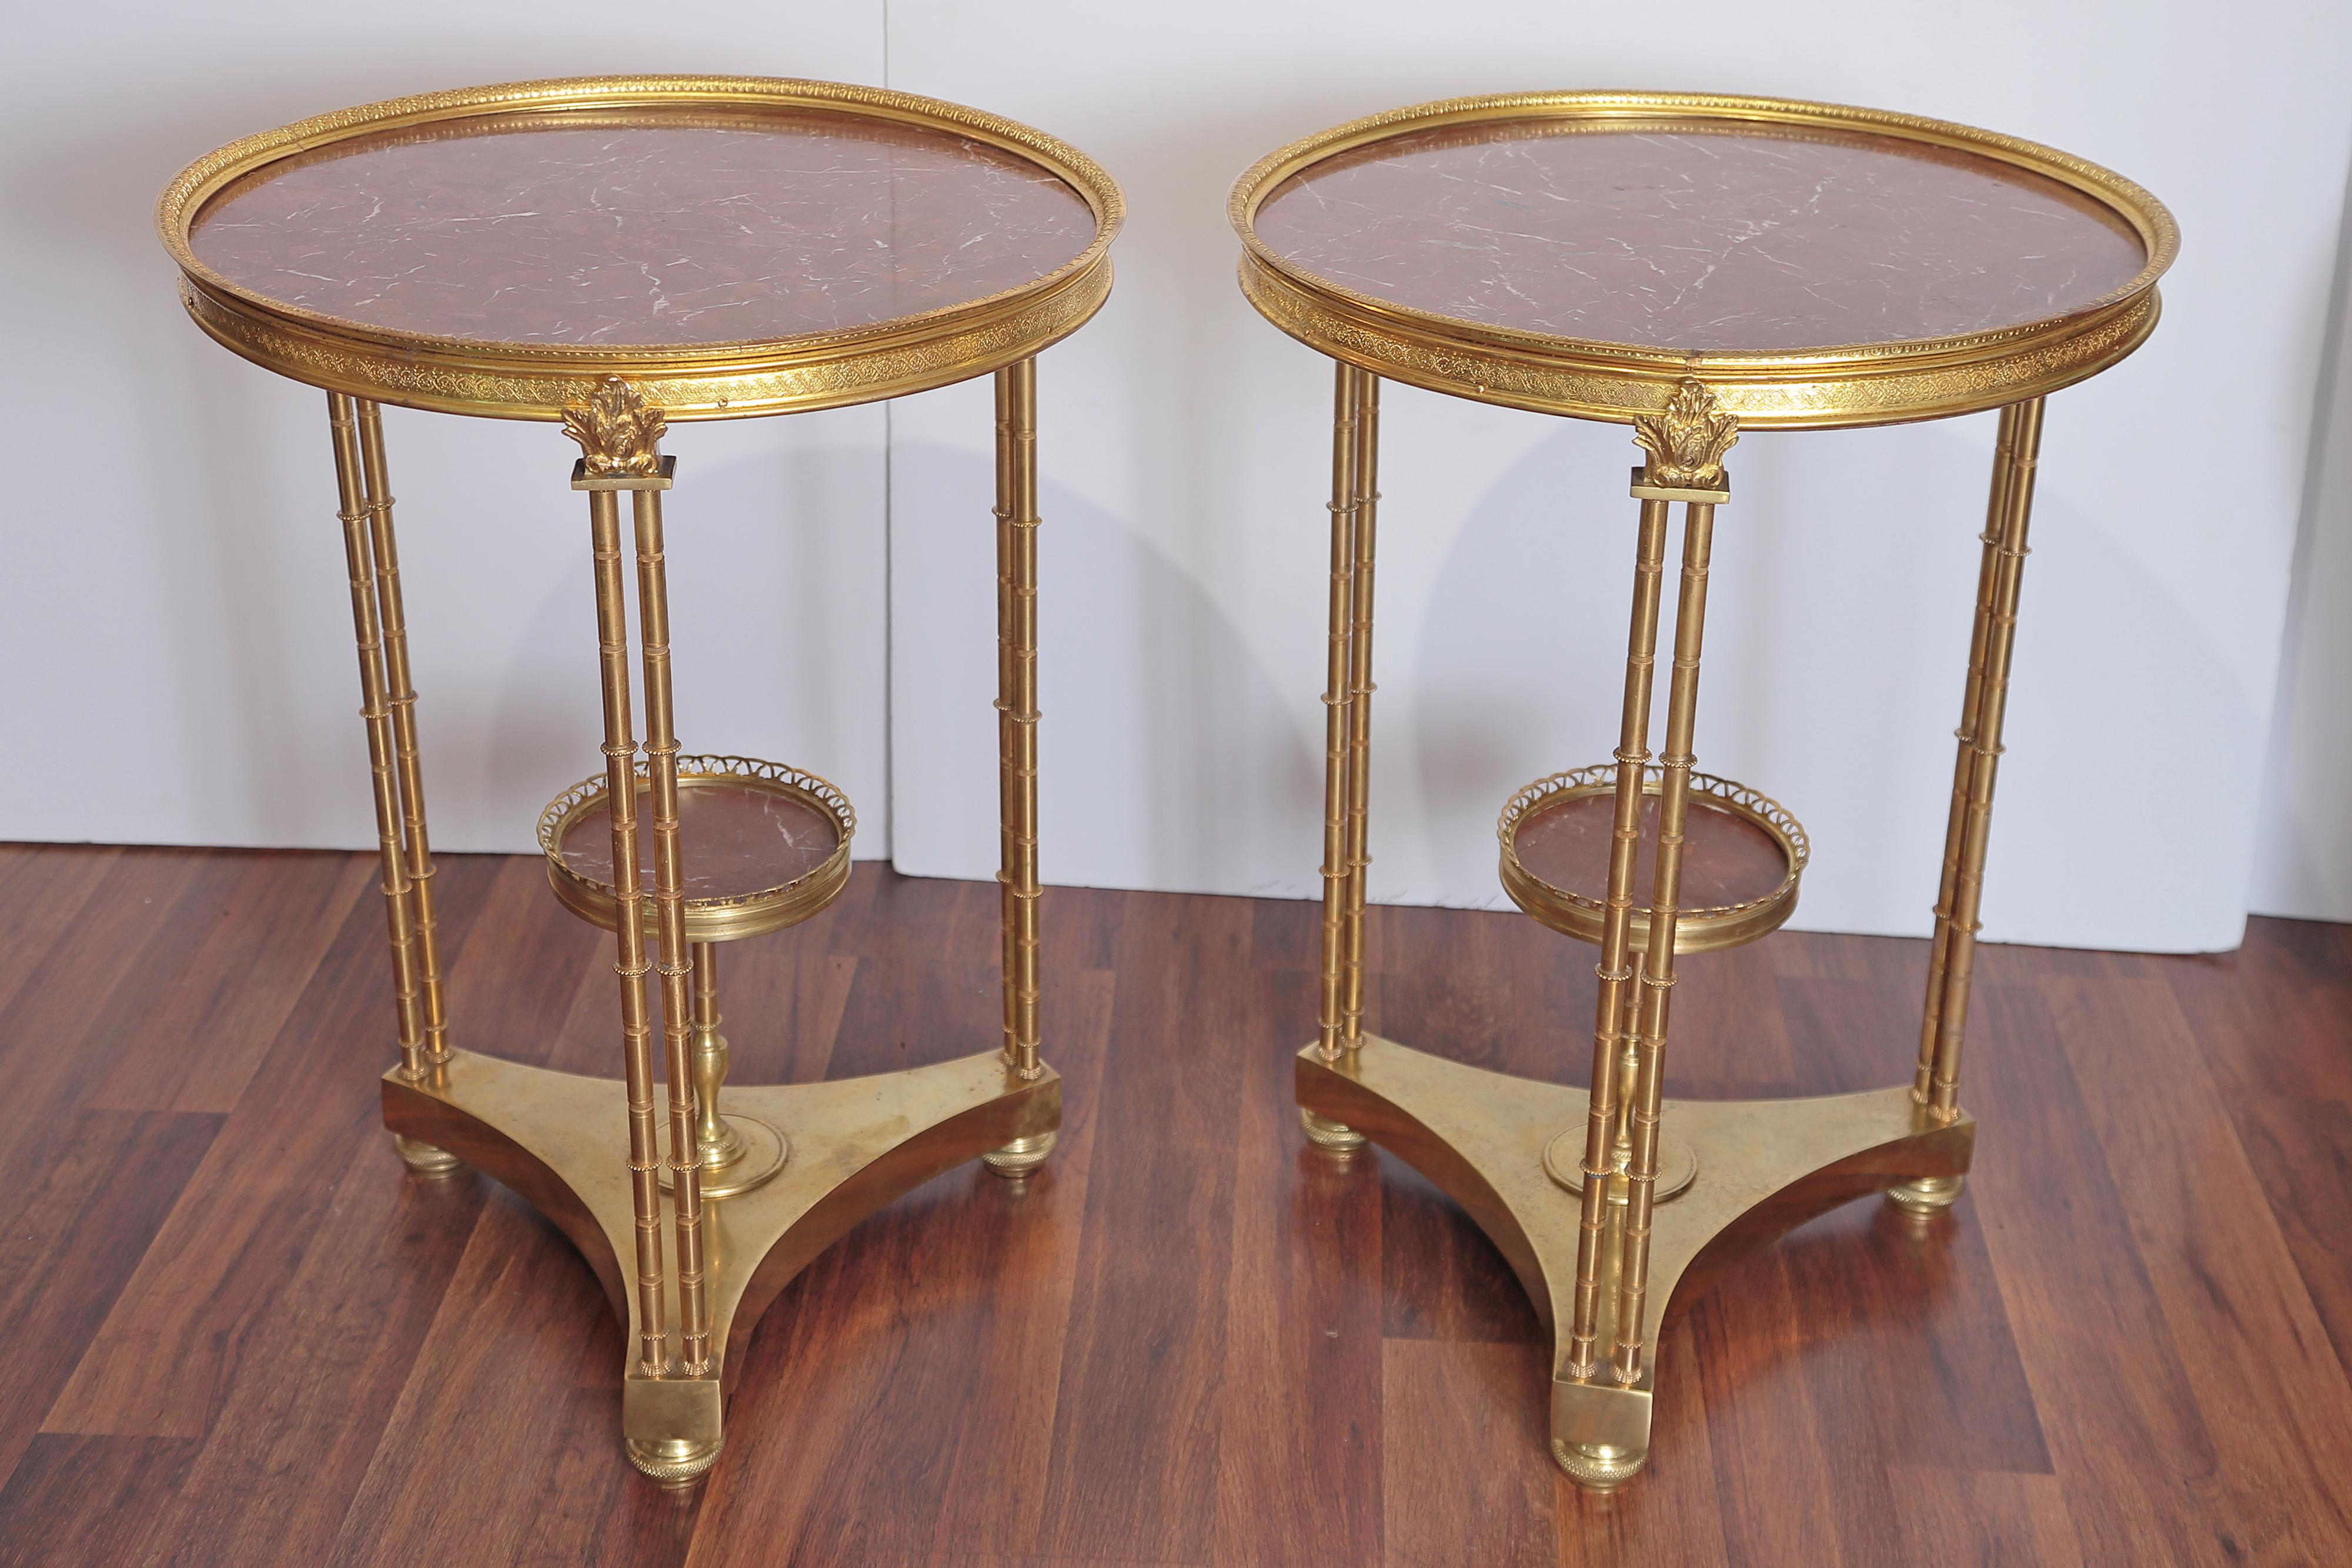 A pair of French gilt bronze Louis XVI marble-top guéridons.